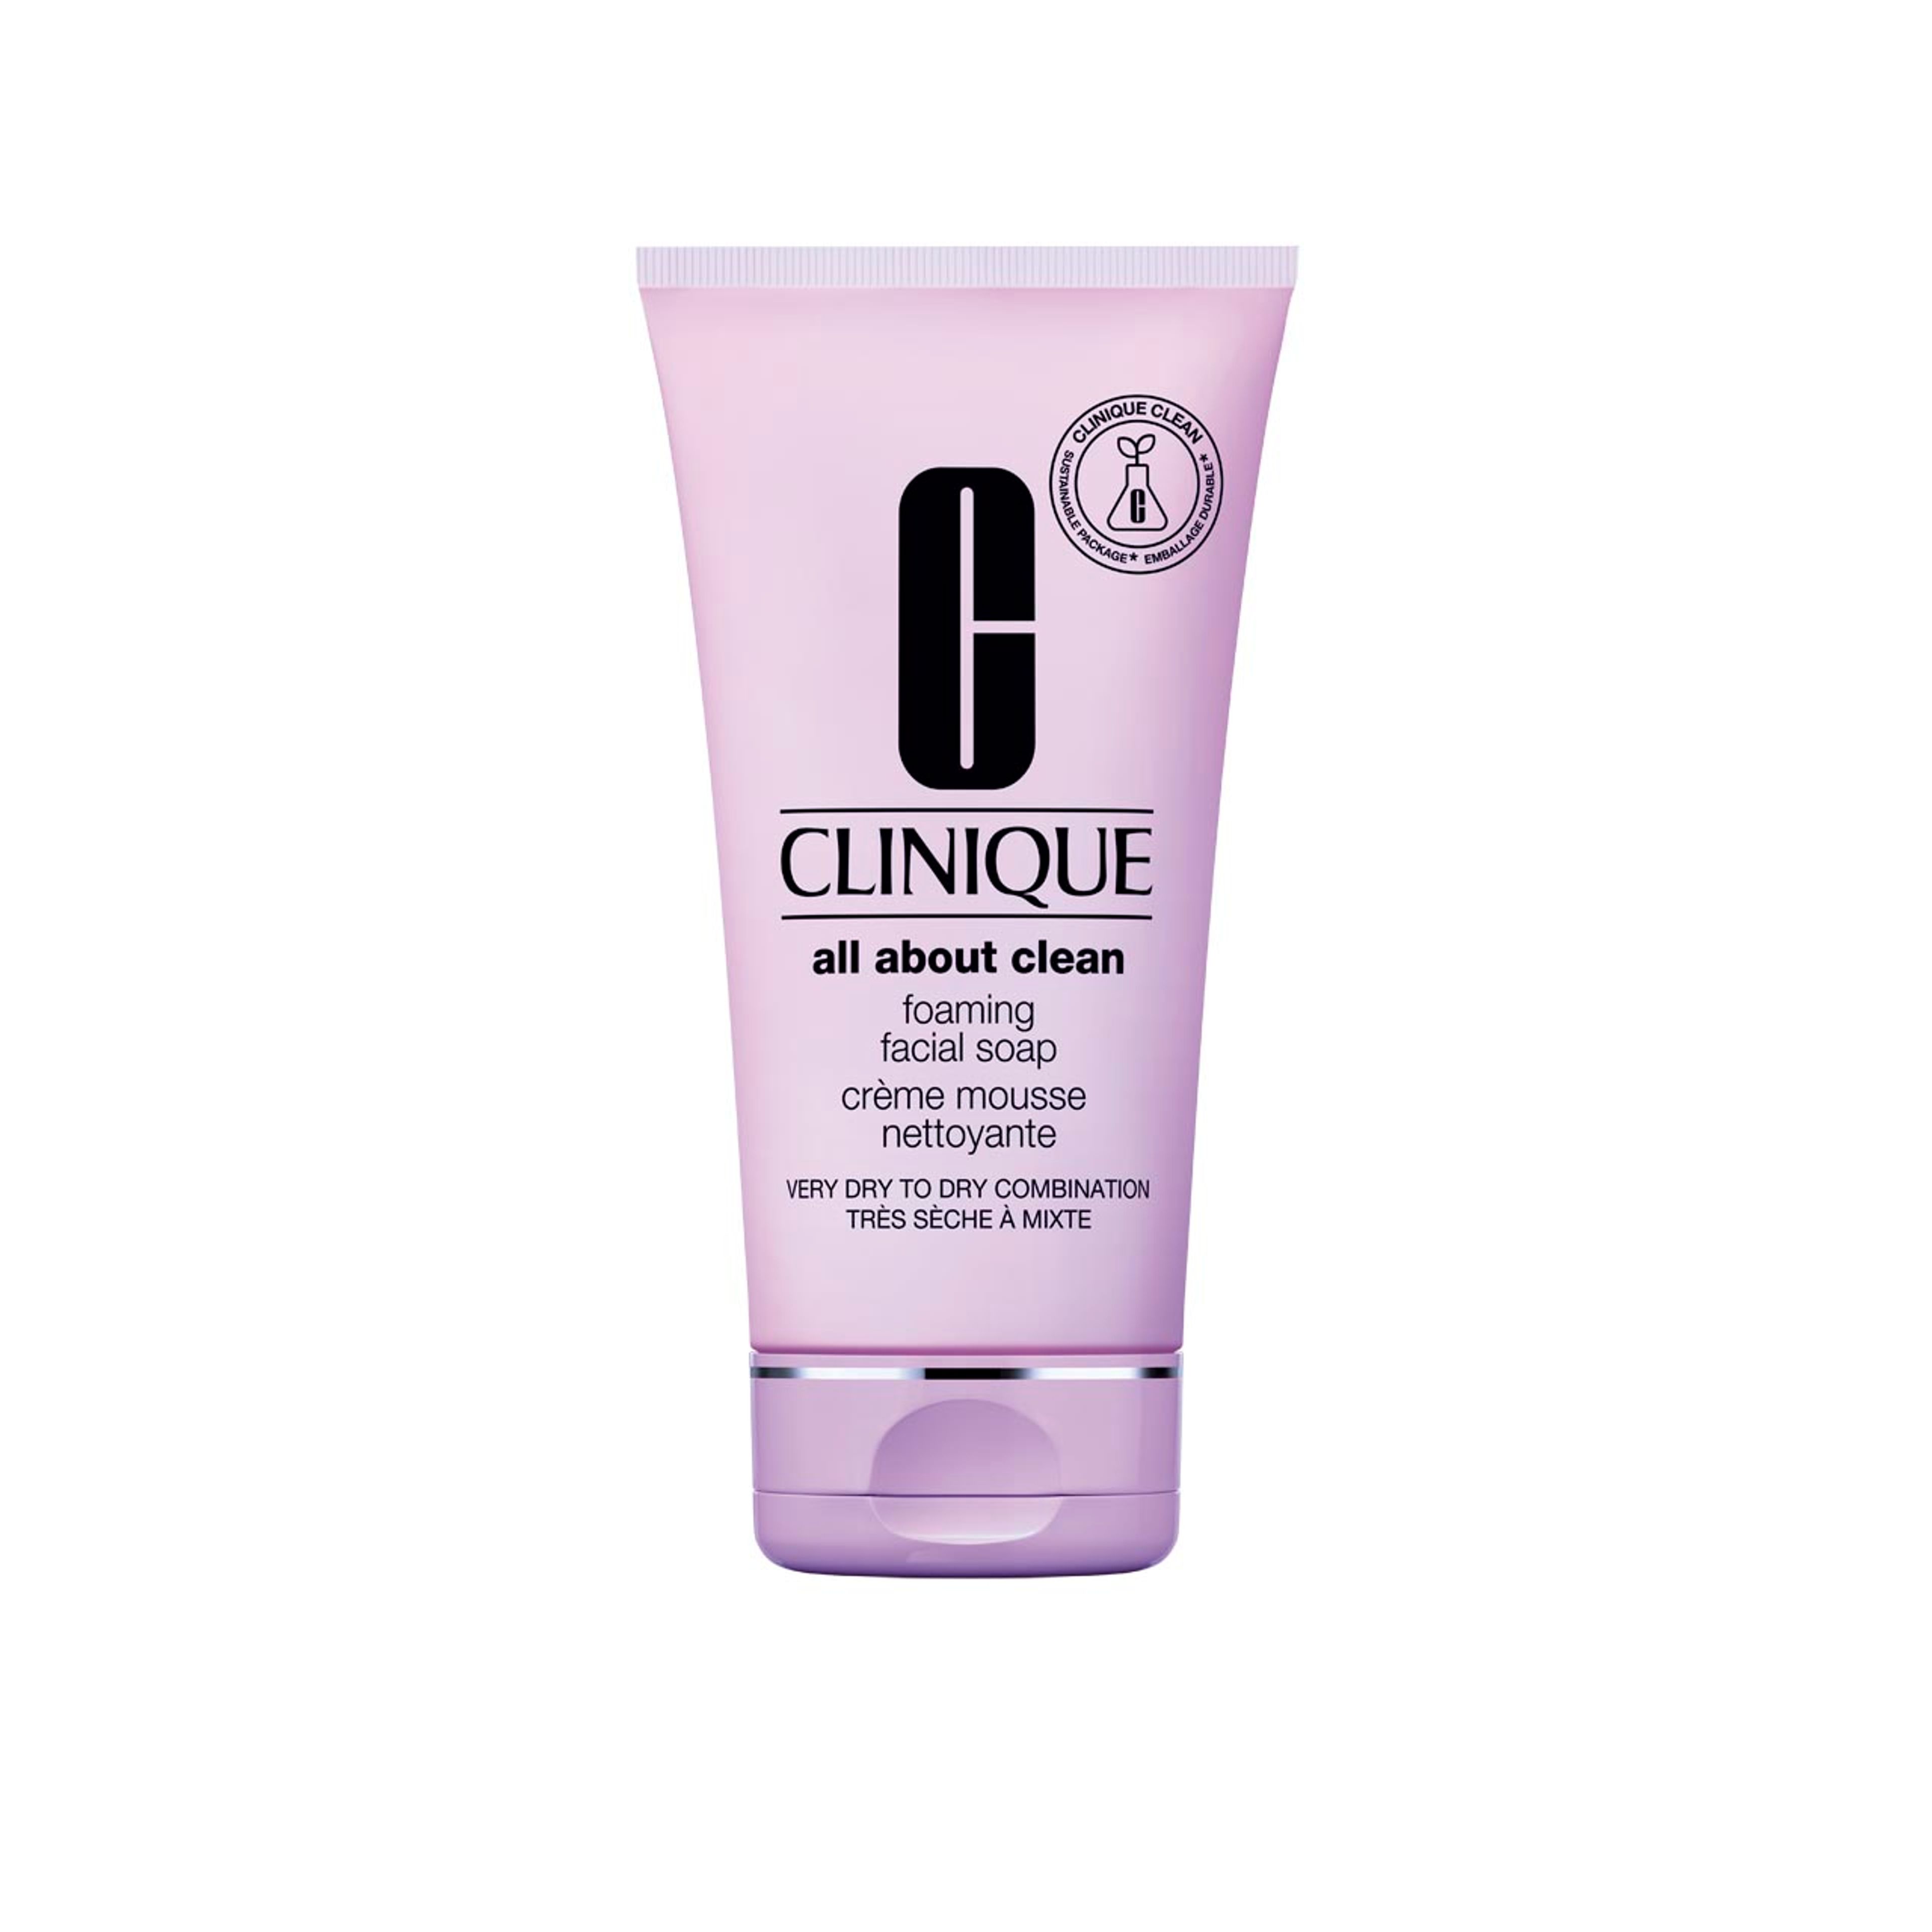 Clinique All About Clean Foaming Facial Soap 1